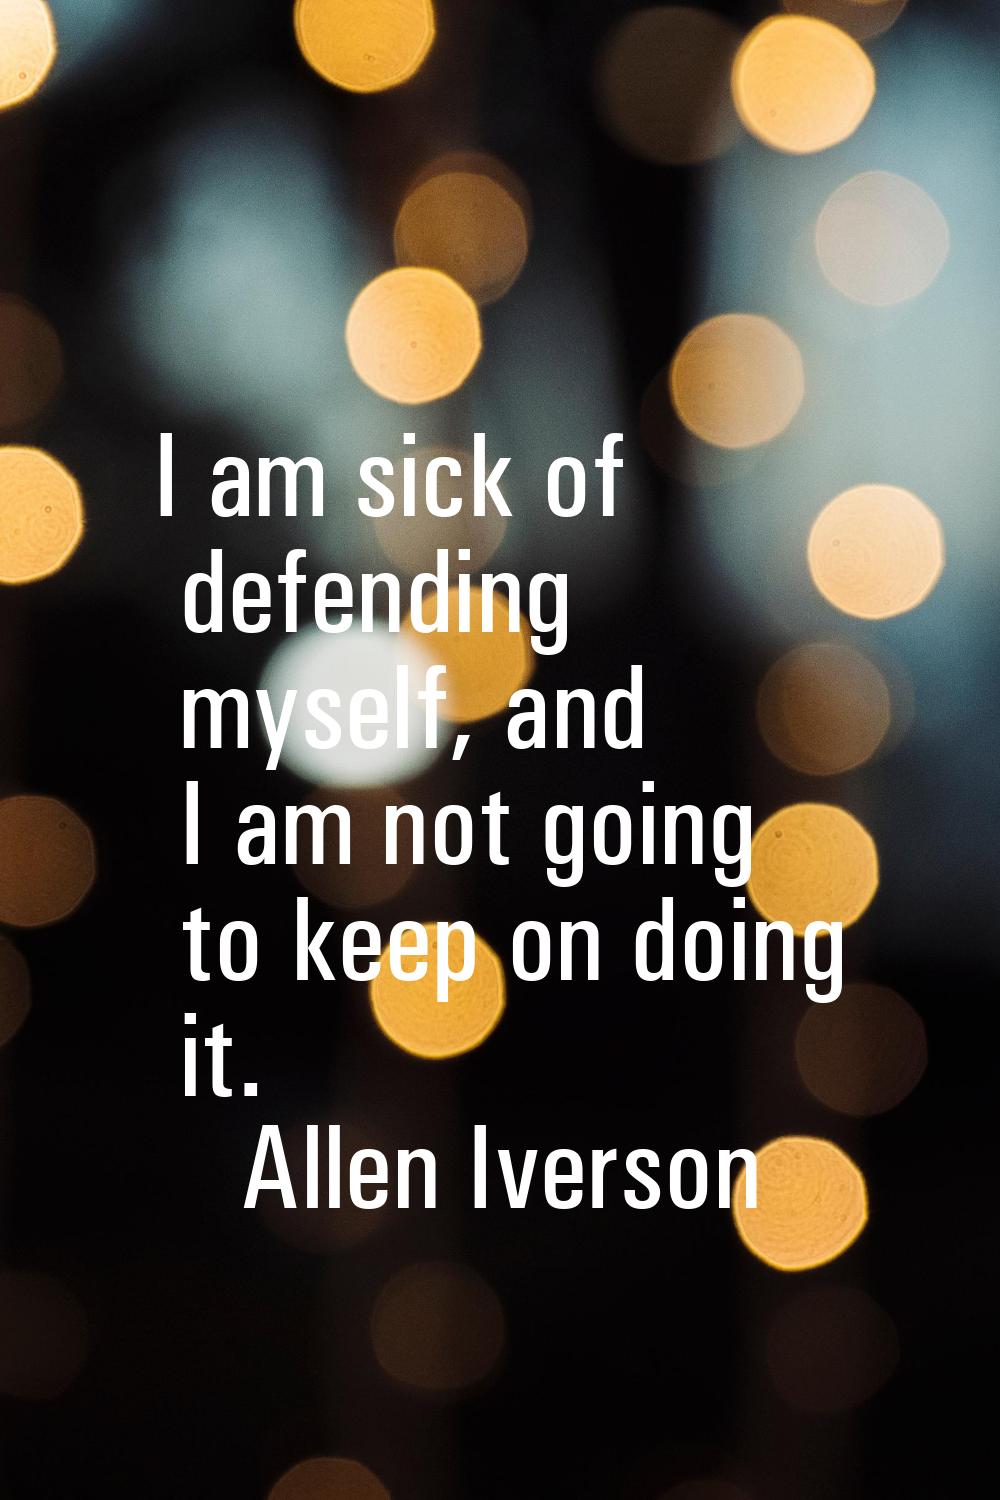 I am sick of defending myself, and I am not going to keep on doing it.